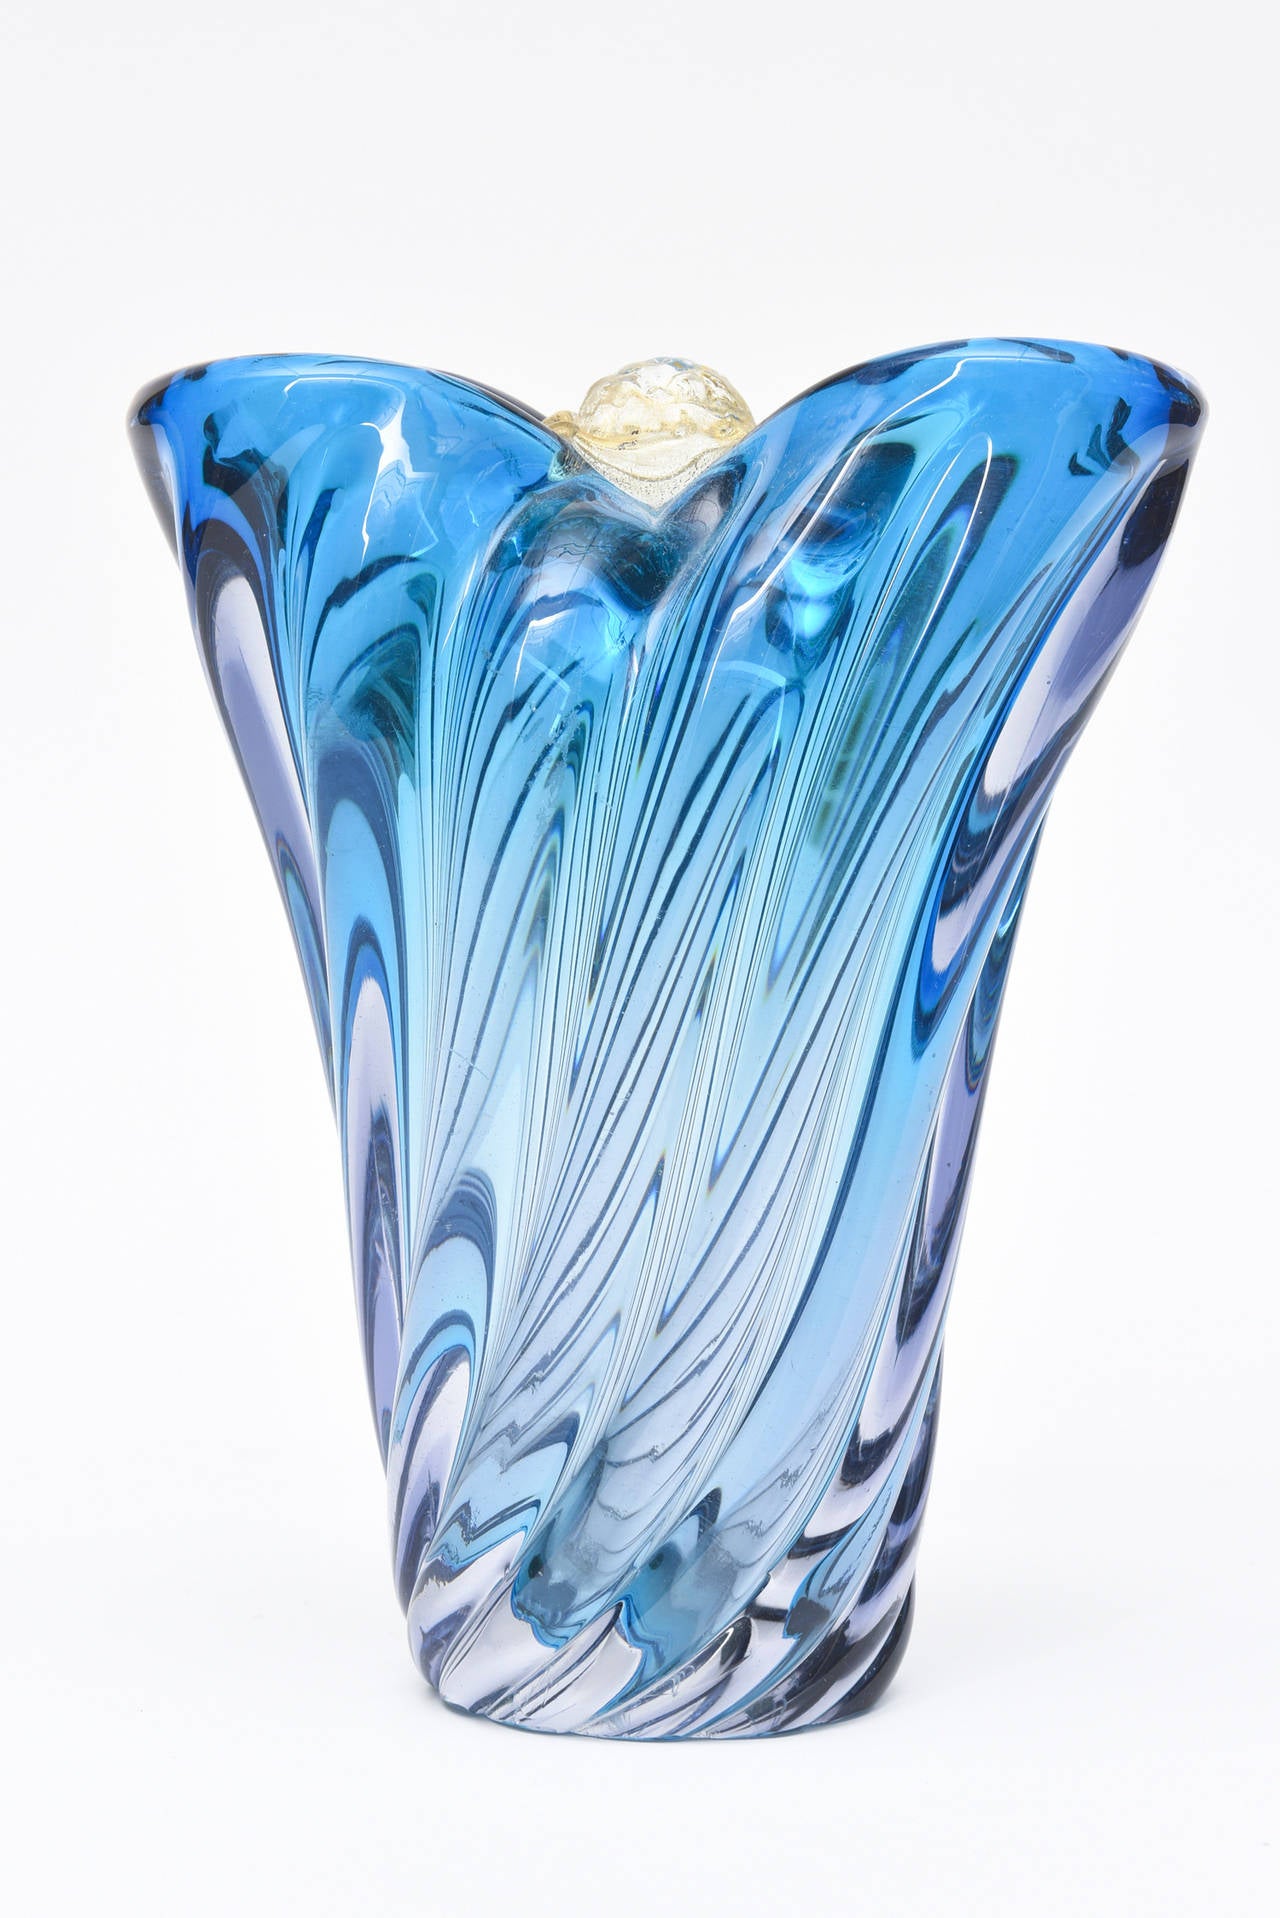 The luscious sapphire blue color of this period  signed Archimede Seguso Italian Murano 
Vase/Vessel has  a beautiful cluster of gold aventurine glass on top.
It has great weight to it and the swirls of the glass create an optical look.

There